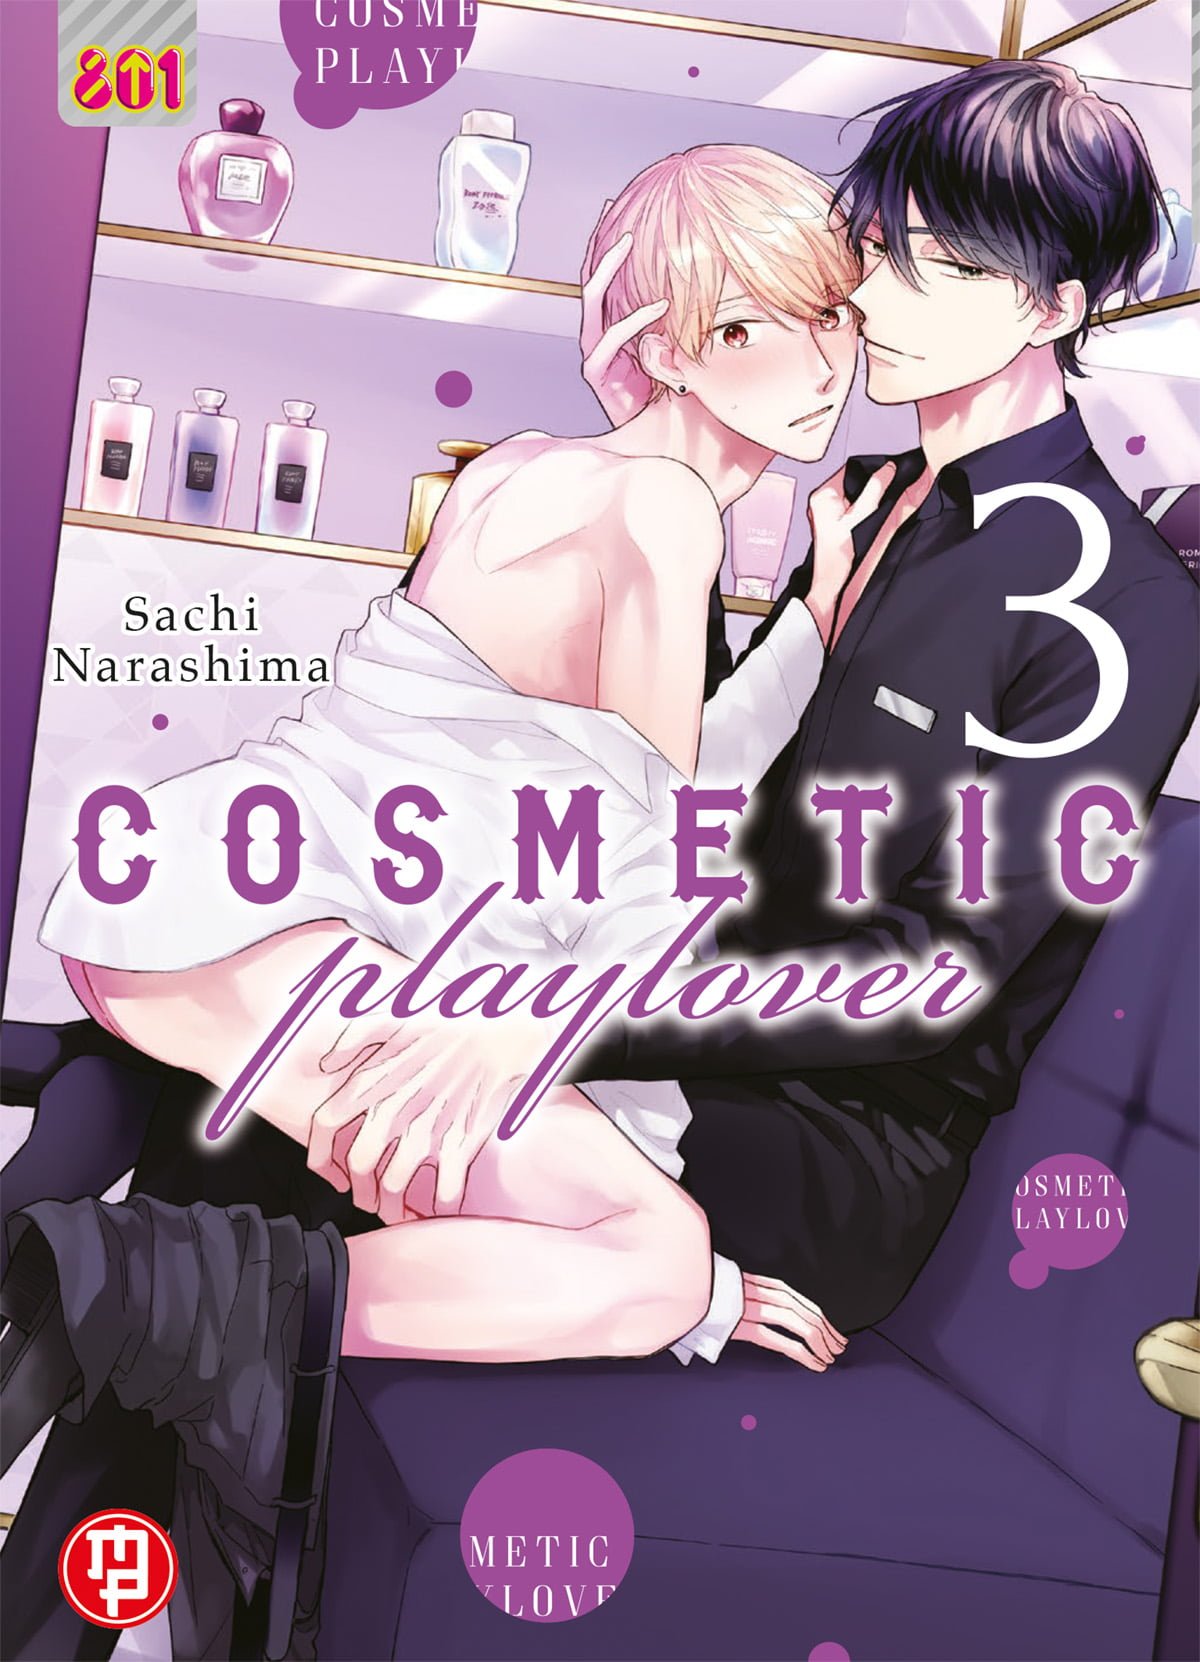 COSMETIC PLAYLOVER 3 LINEA 801